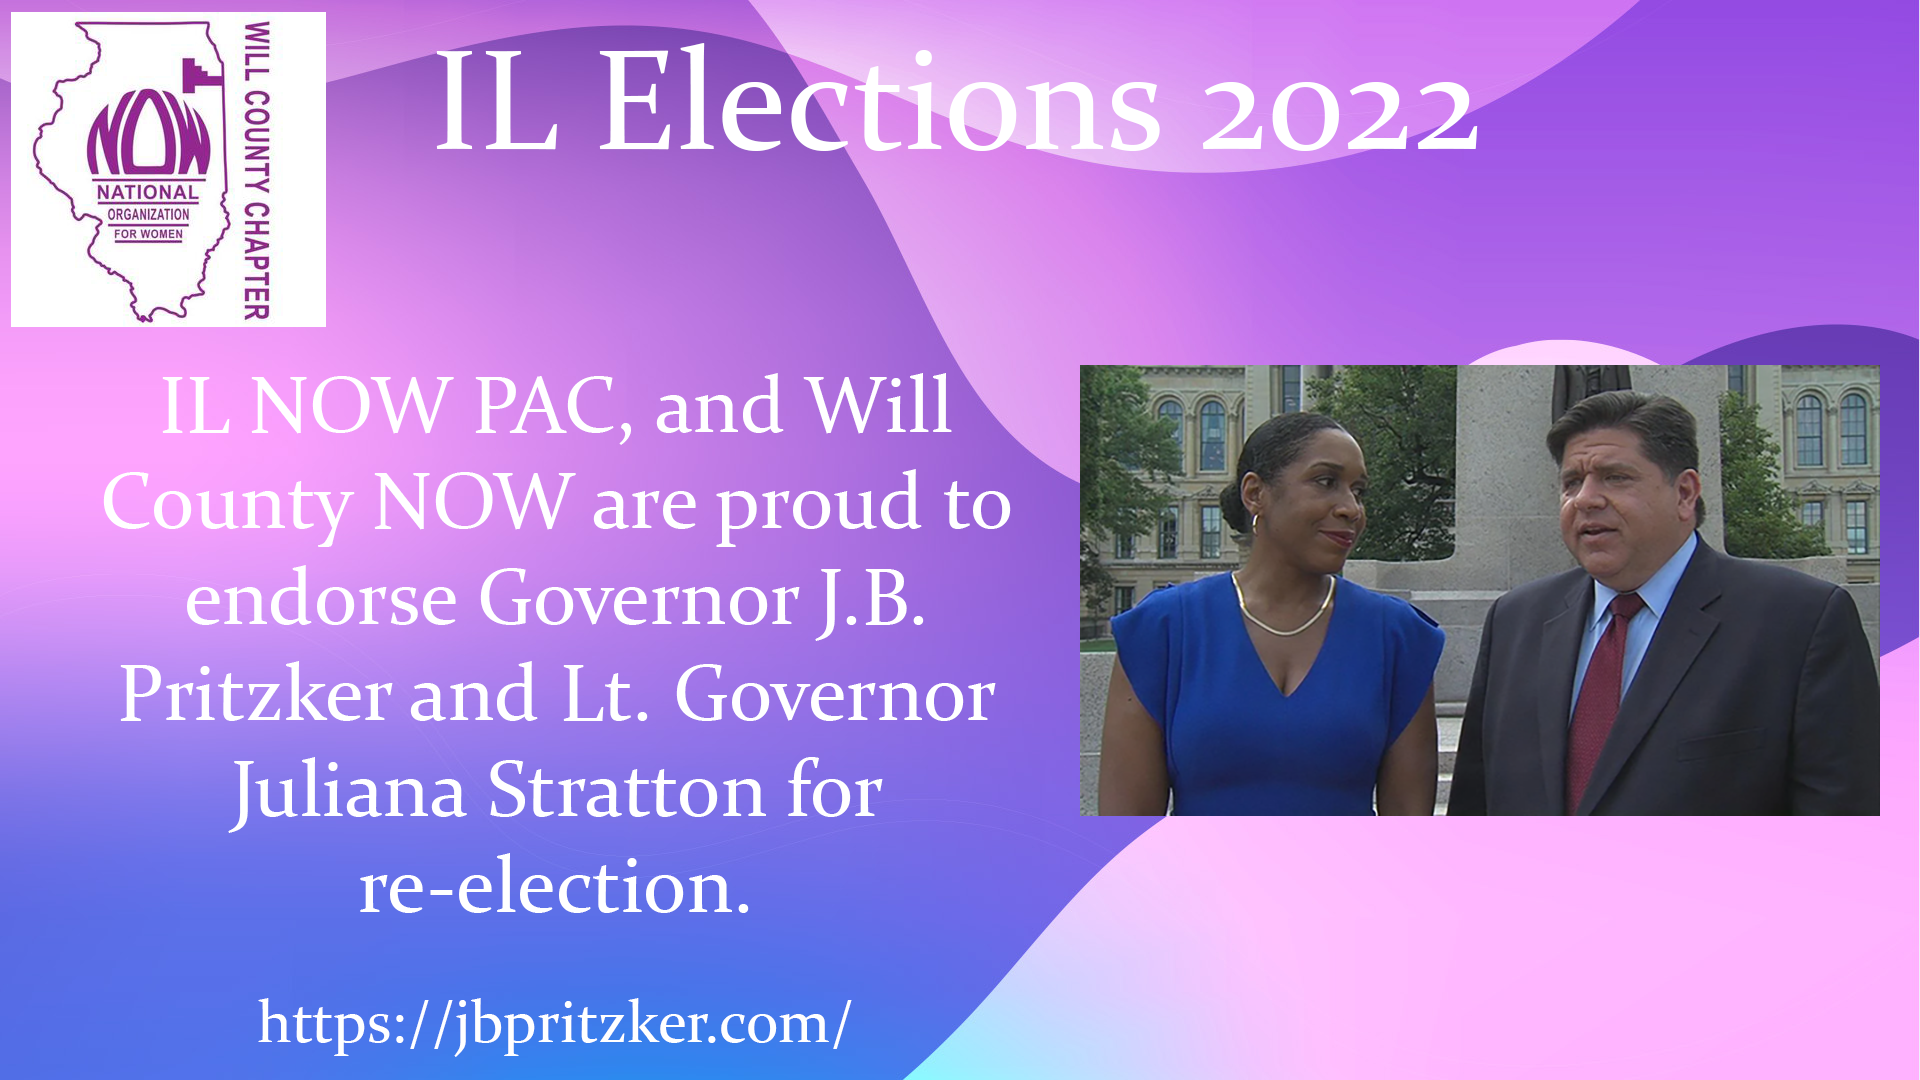 Will County NOW Endorses Governor J.B. Pritzker  and Lt. Governor Juliana Stratton for Re-Election